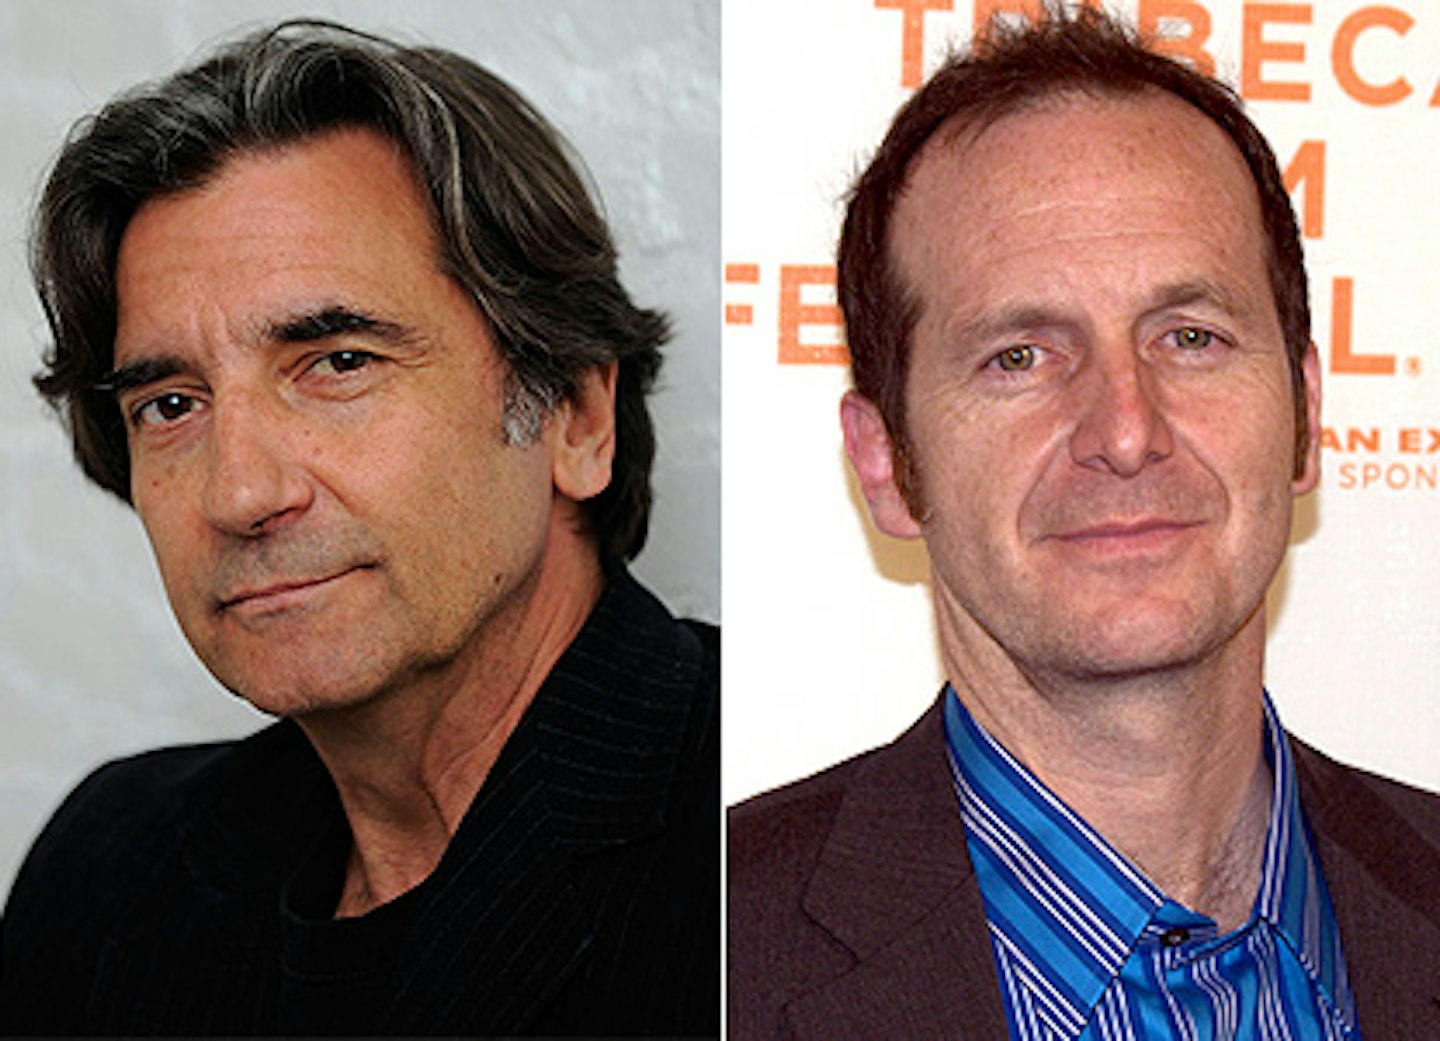 Griffin Dunne, Denis O'Hare